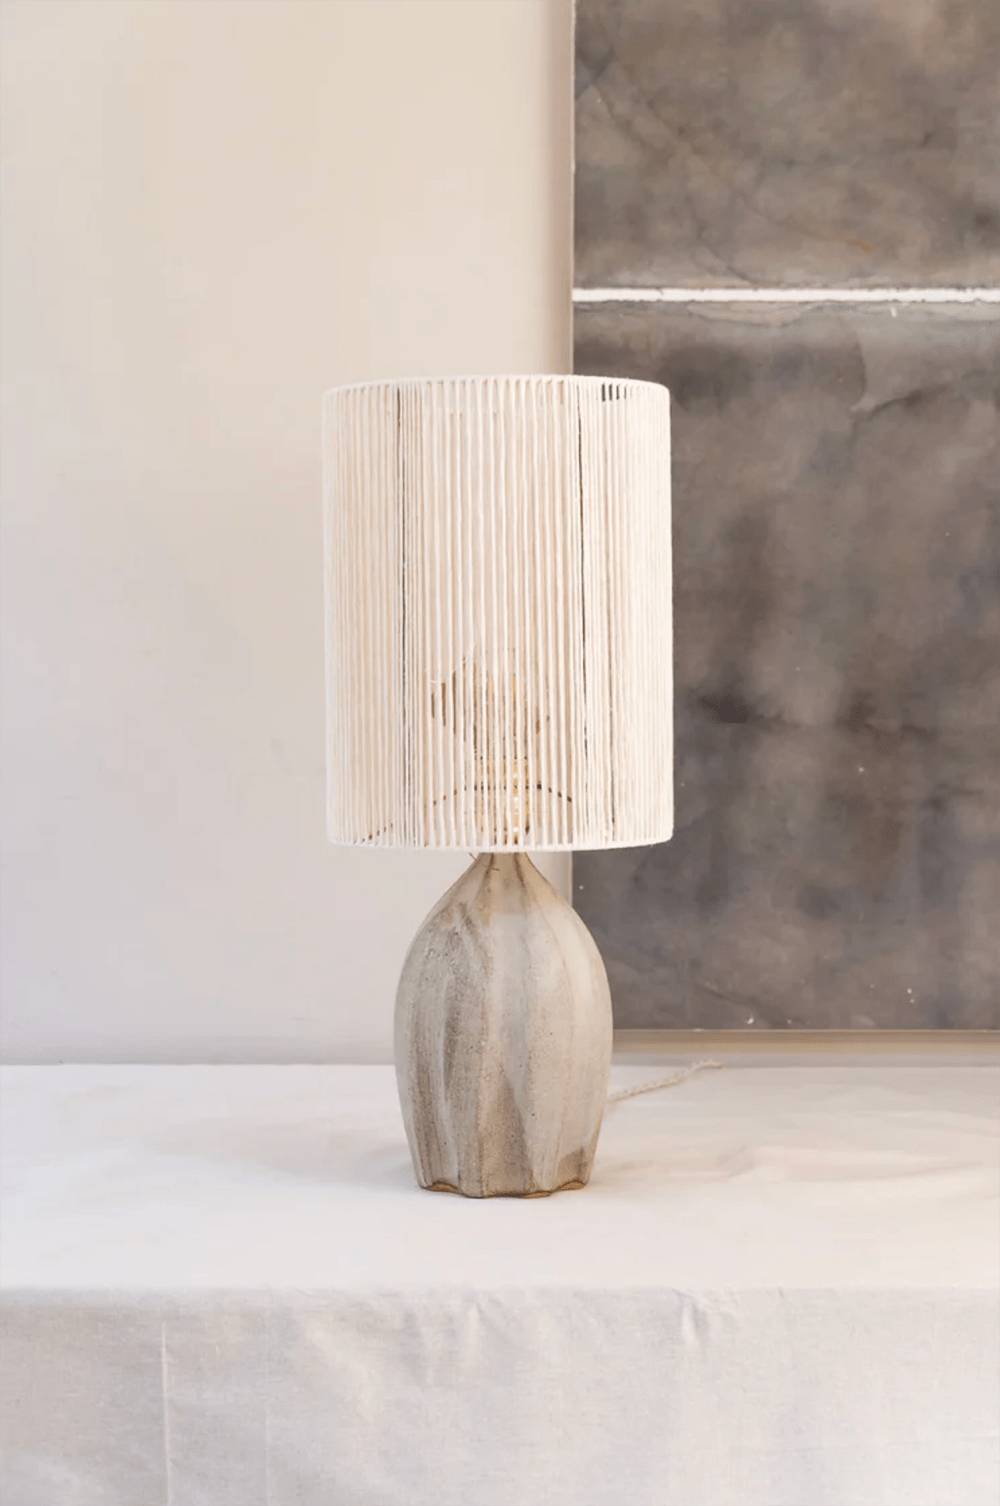 A ceramic table lamp by Grès Ceramics, handcrafted in France. The quirky hand knotted jute screen adds a bohemian feel to any interior. 